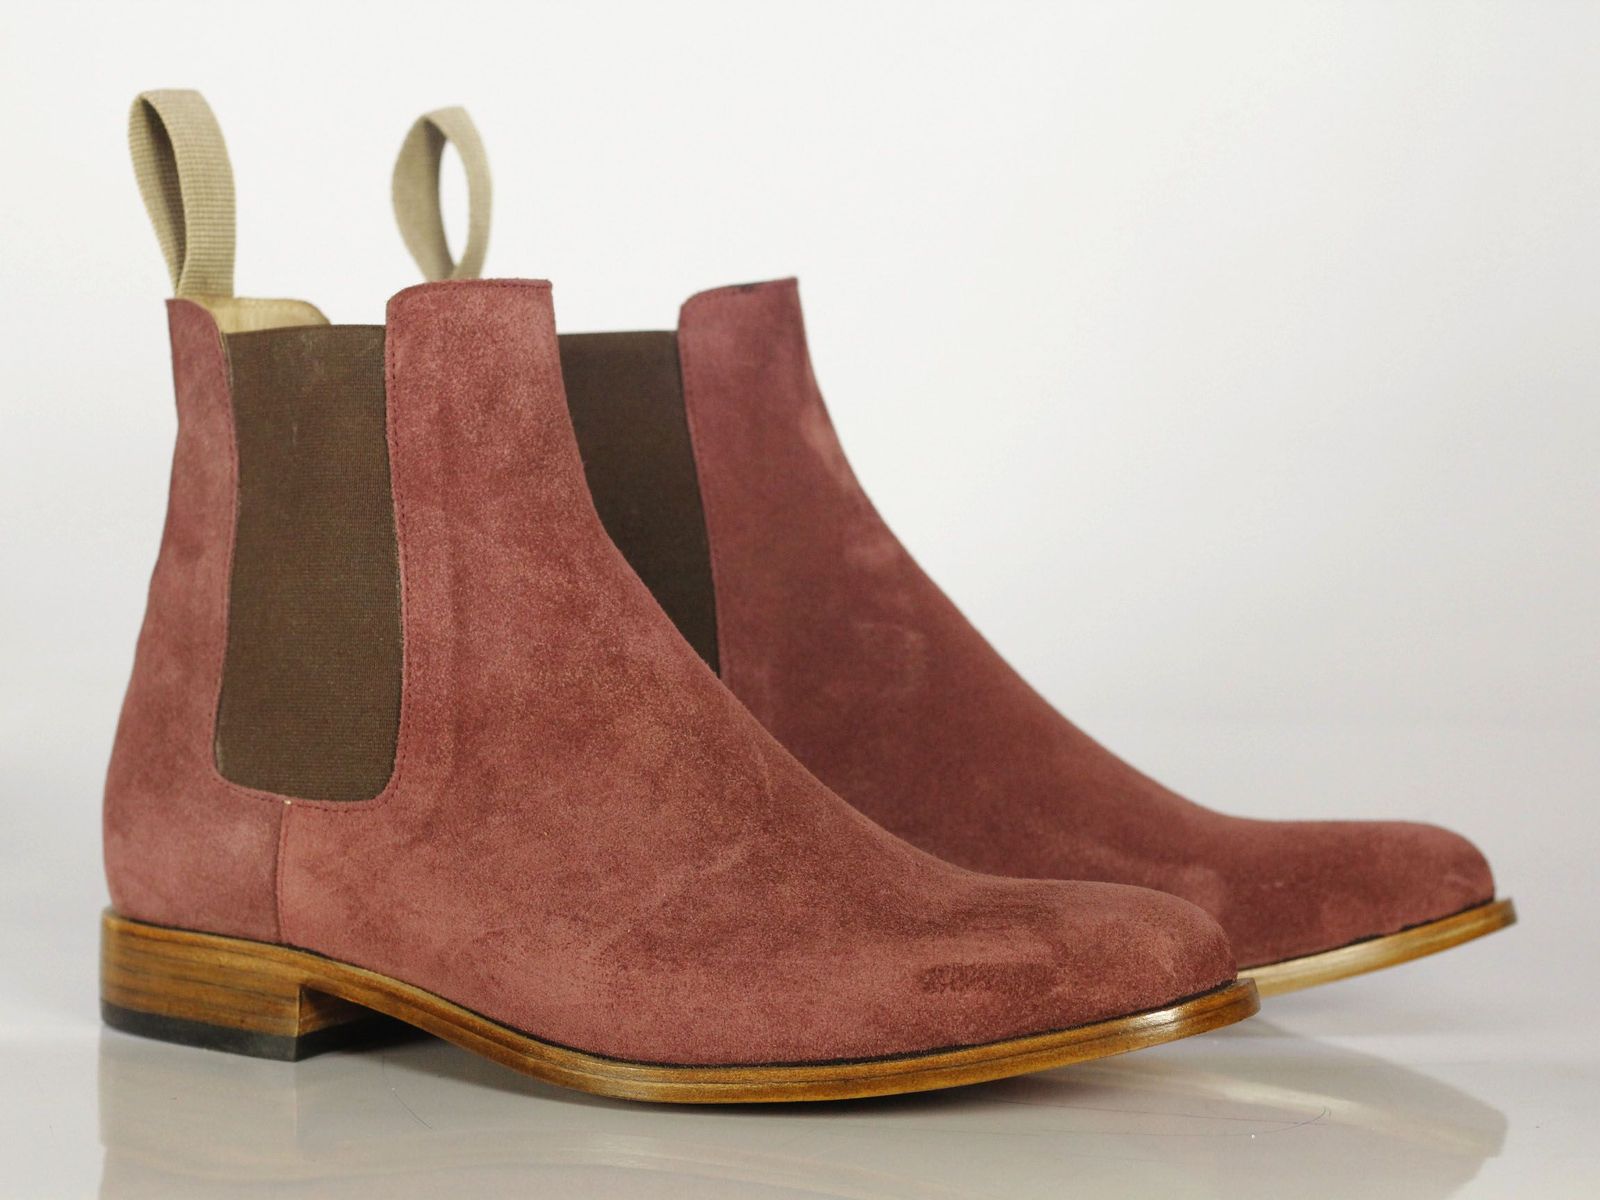 Bespoke Men's Pink Suede Leather Slip On Chelsea Formal Dress Leather Sole Boots